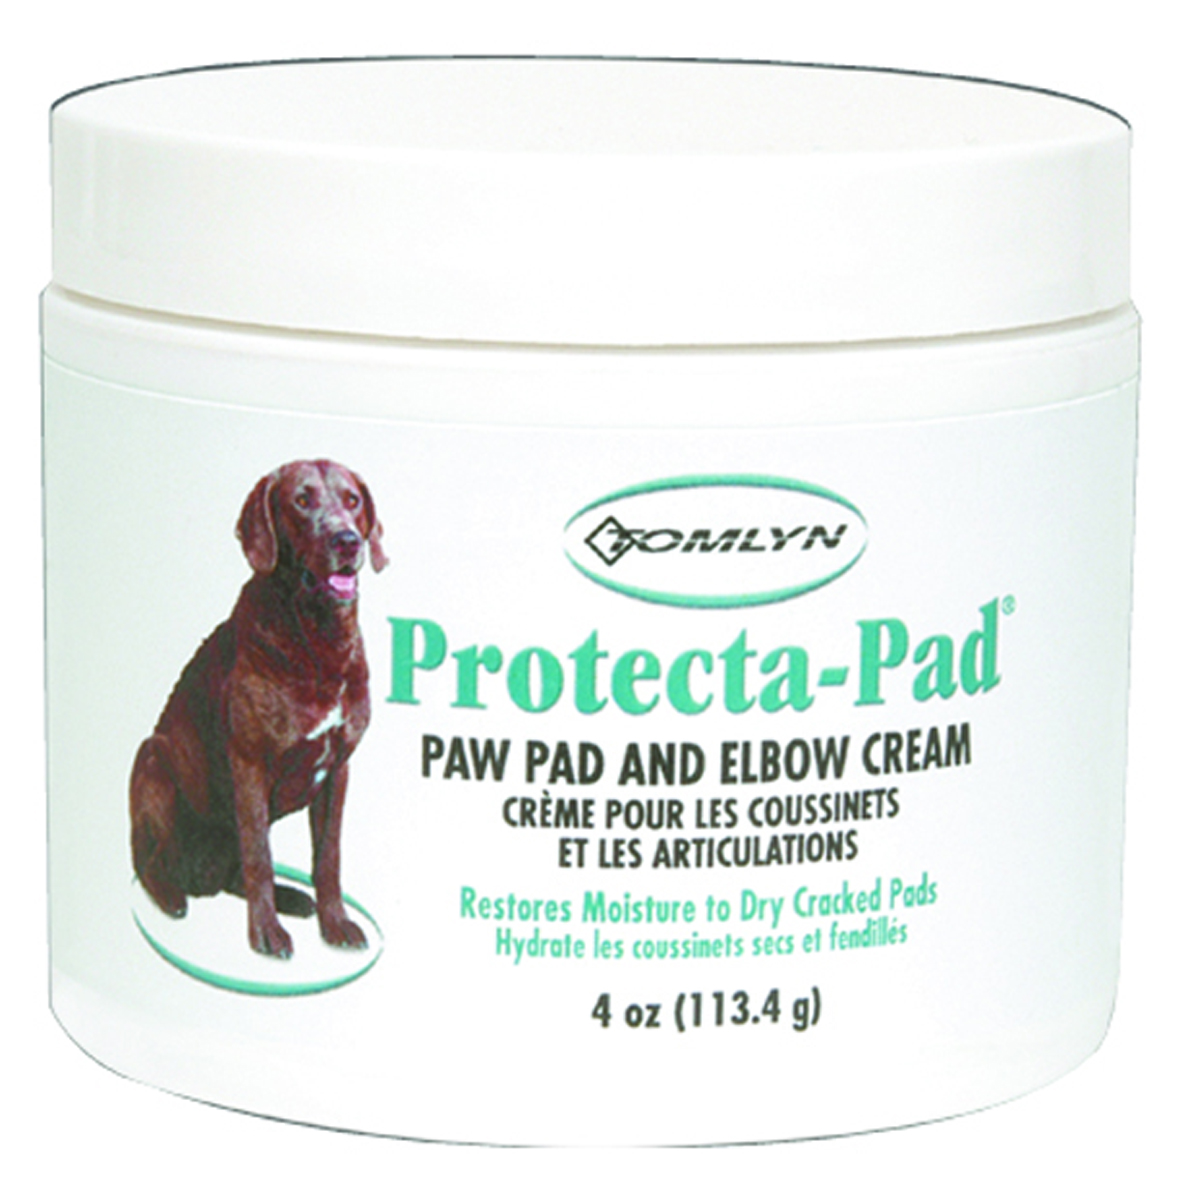 PROTECTA PAD CREAM FOR DOGS